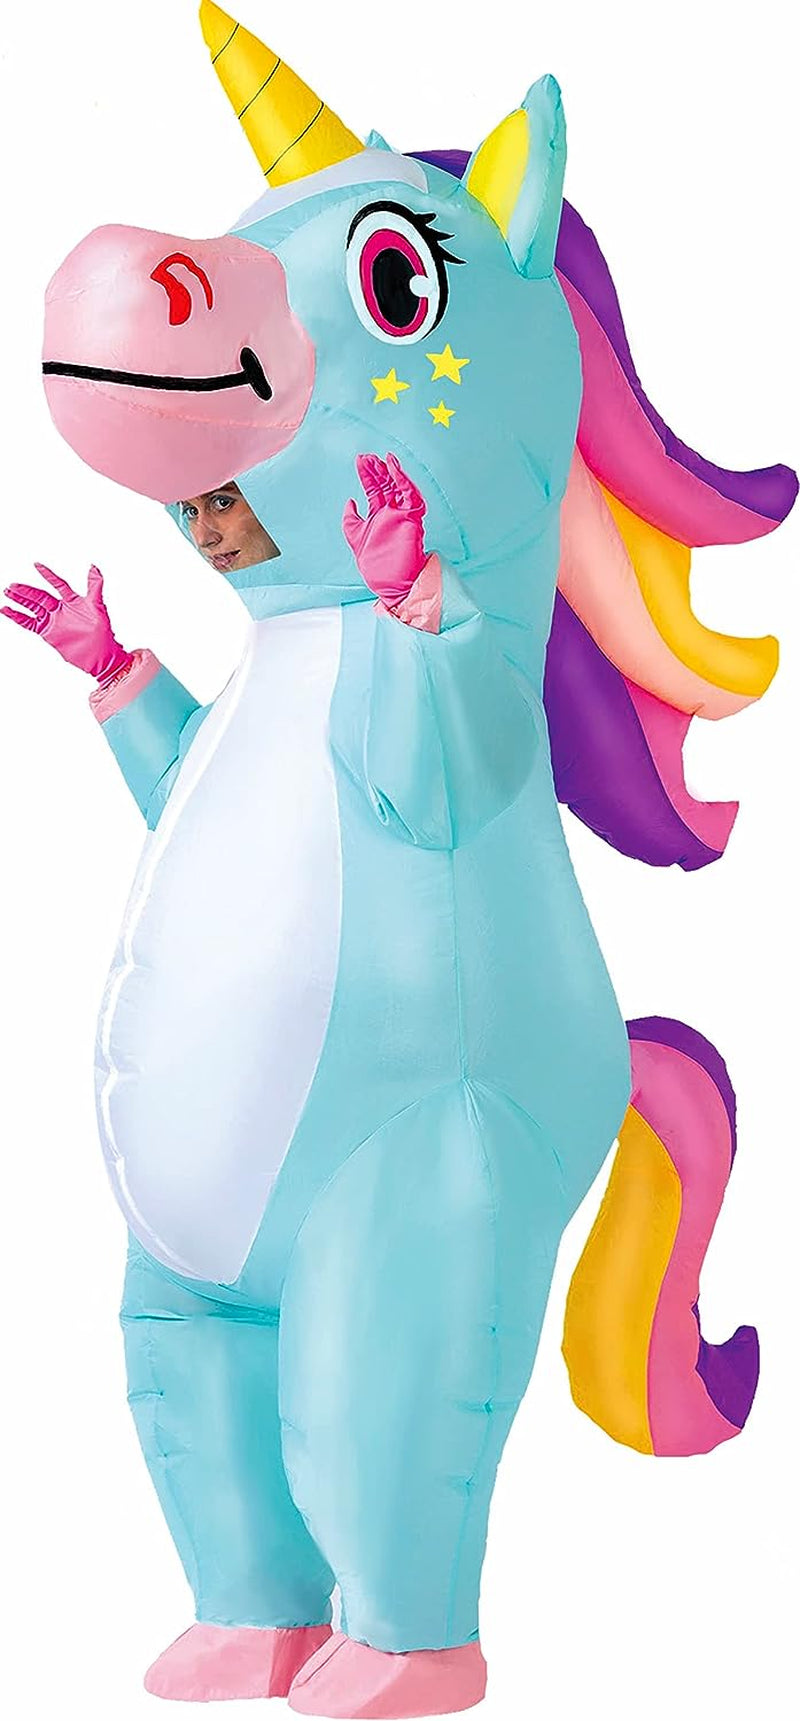 Spooktacular Creations Inflatable Costume Full Body Unicorn Air Blow-Up Deluxe Halloween Costume - Adult Size  Spooktacular Creations Blue  